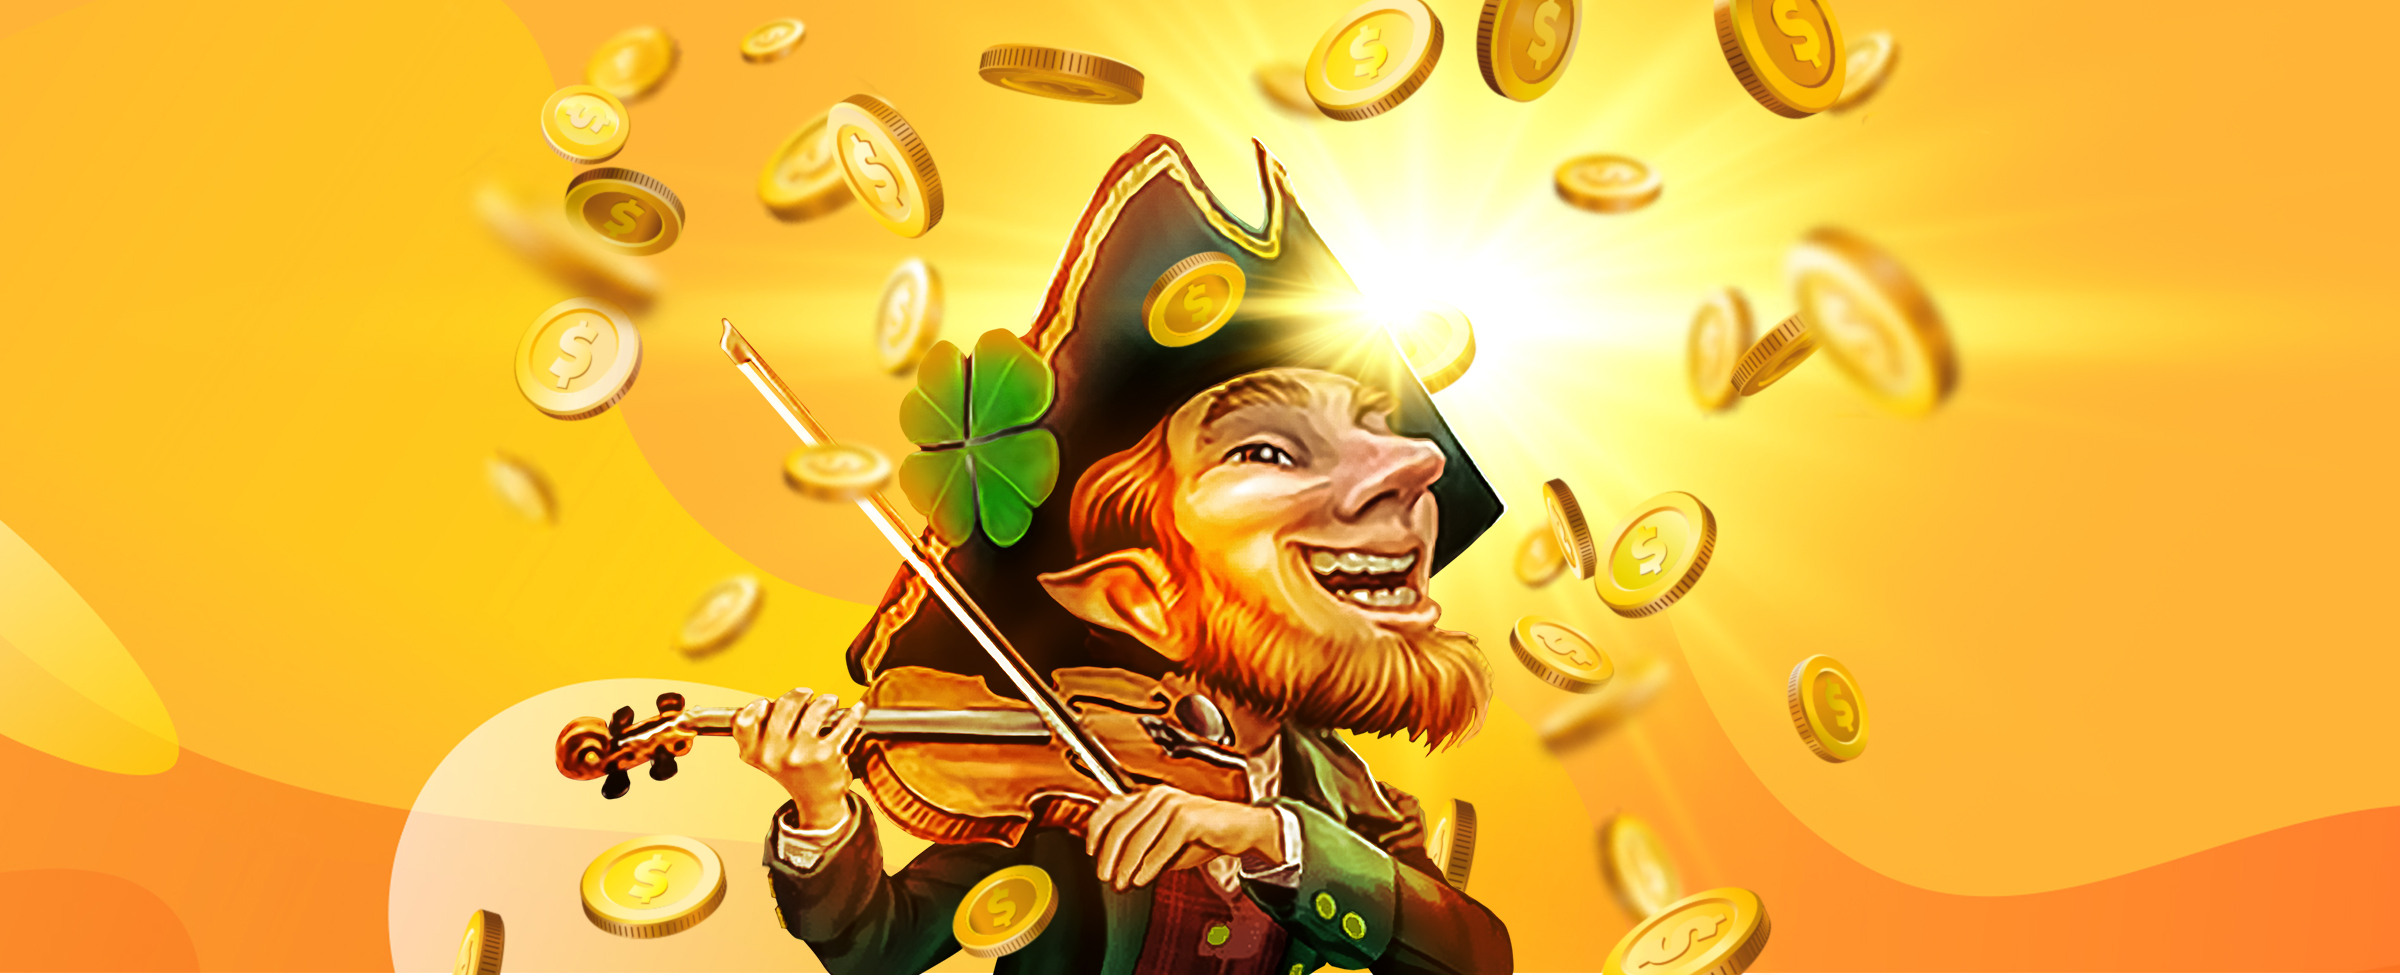 Be treated to the traditional sounds of fiddles and bouzouki way over yonder as you play Leprechaun Legends. It doesn’t get merrier than this at SlotsLV!